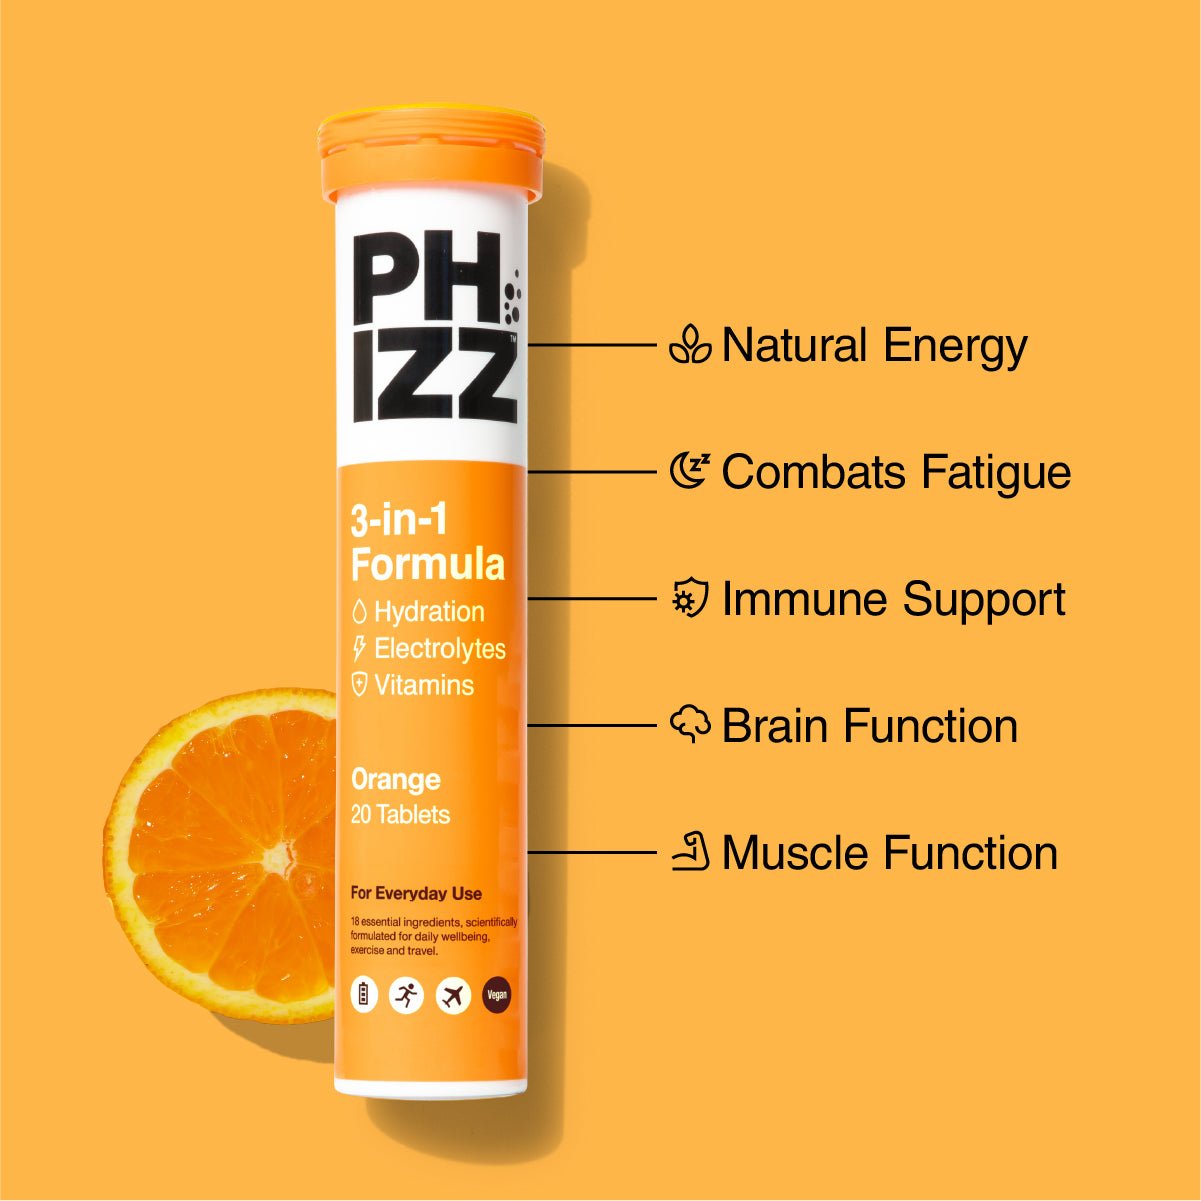 The Phizz Full Works Bundle